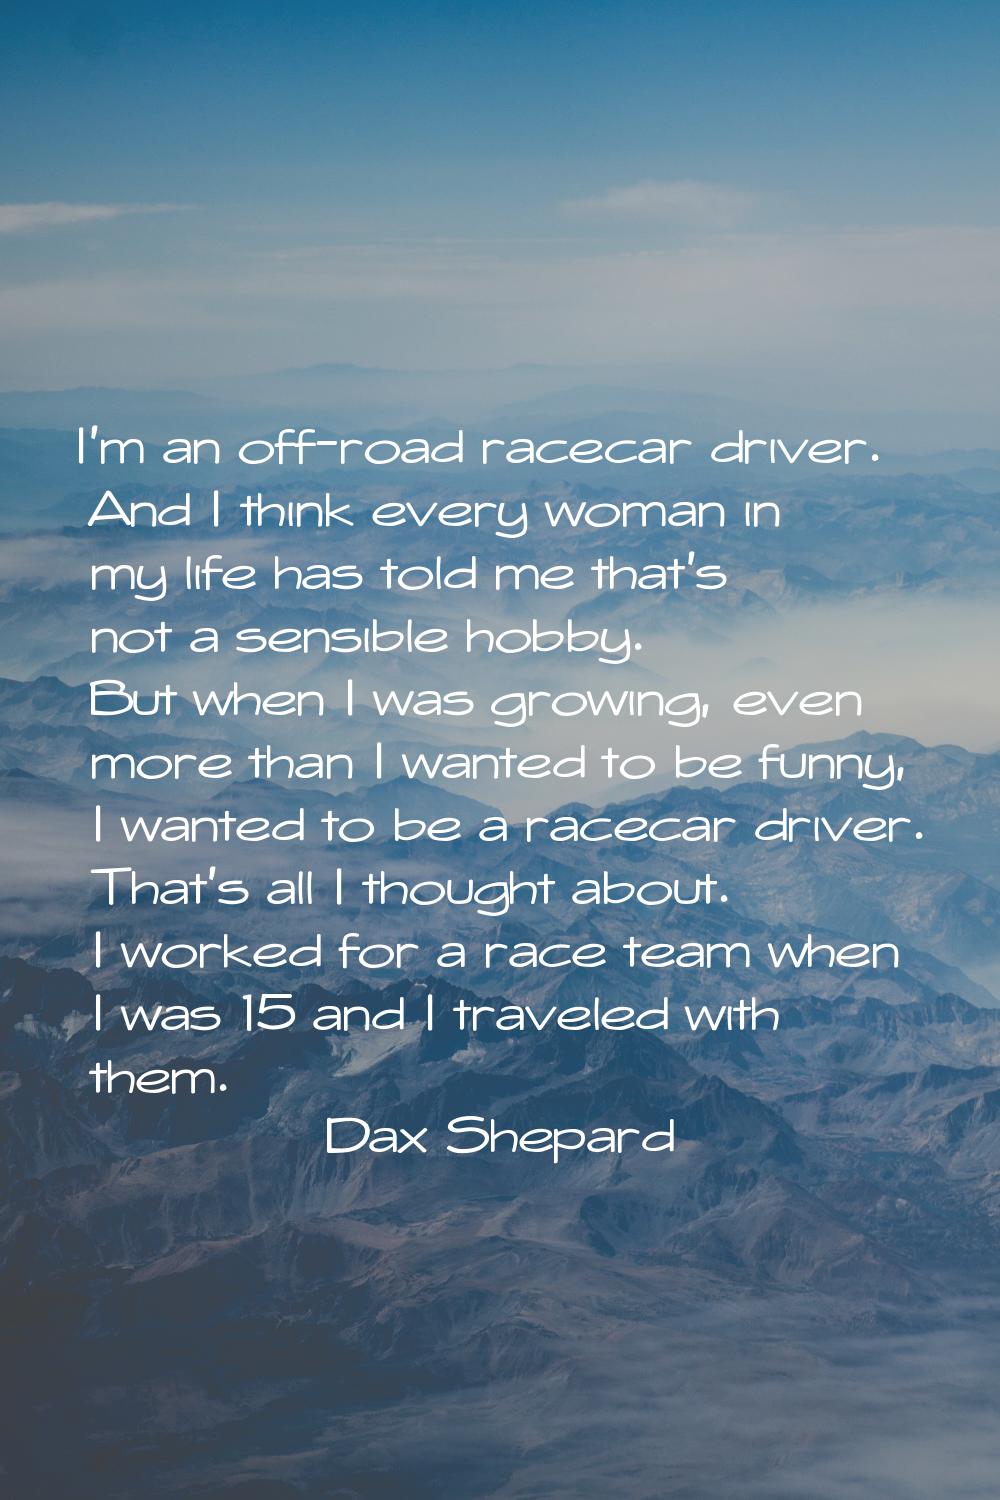 I'm an off-road racecar driver. And I think every woman in my life has told me that's not a sensibl